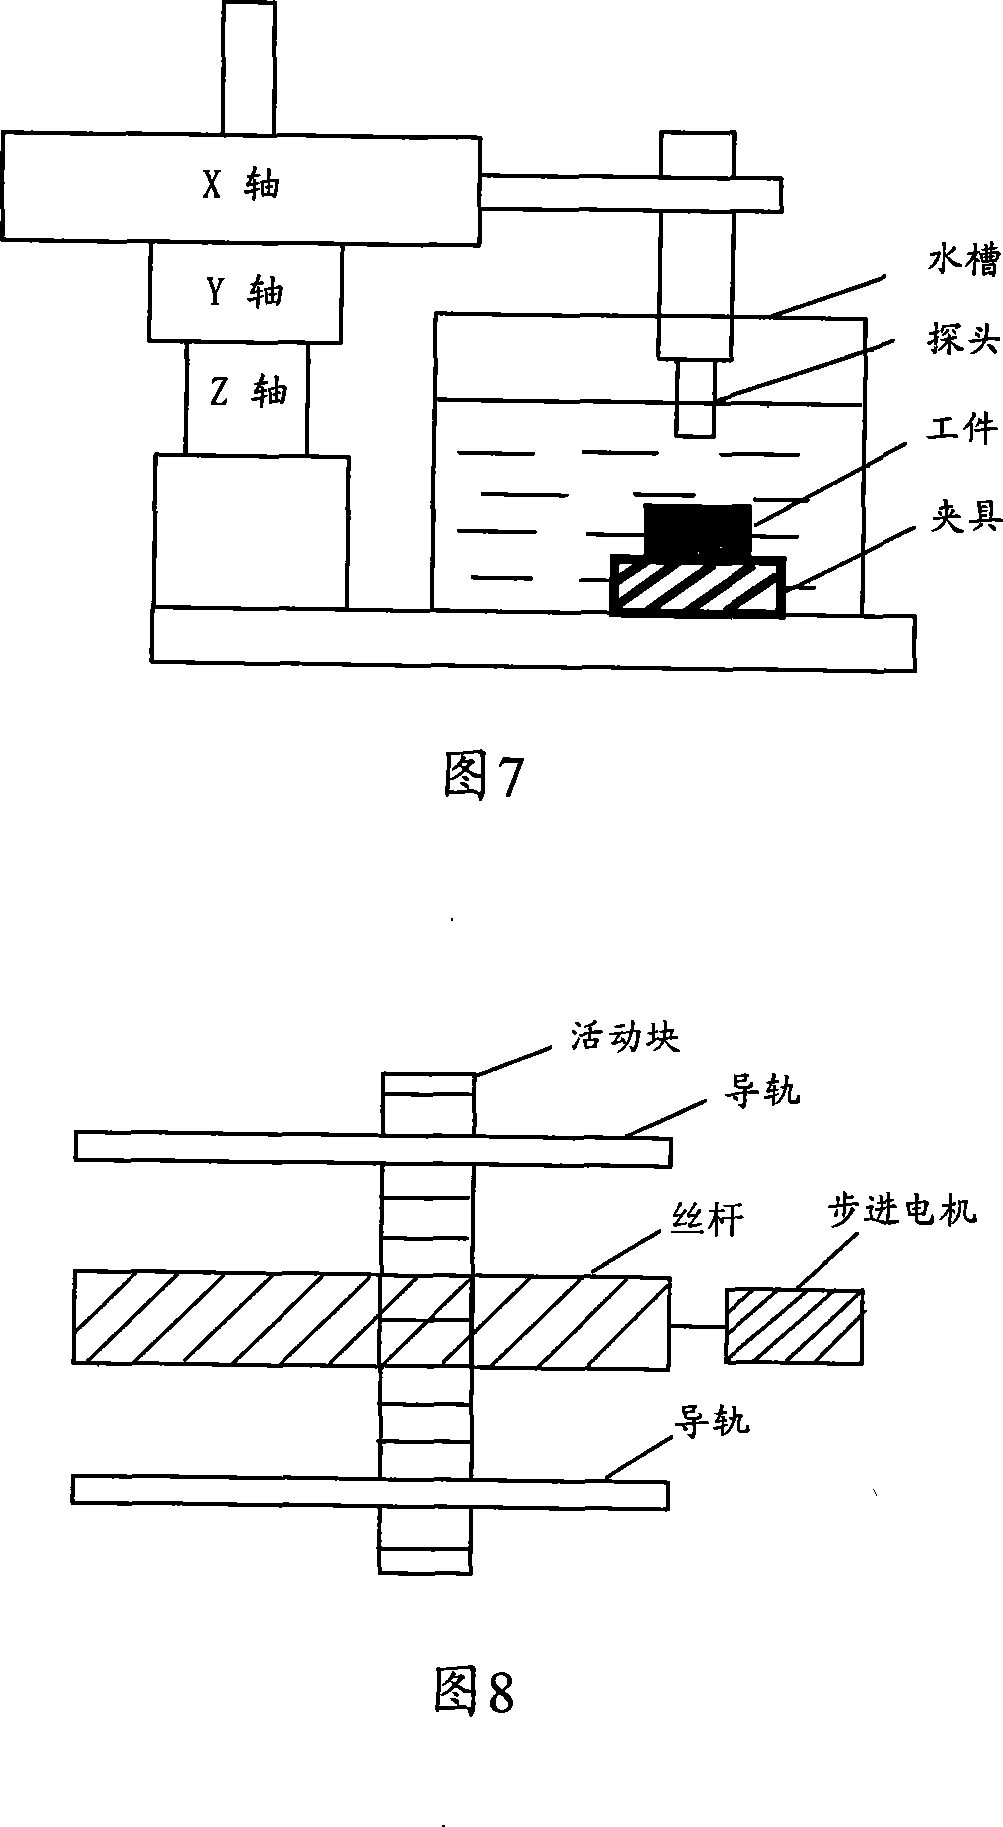 High-resolution welding seam supersonic image-forming damage-free detection method and detection system